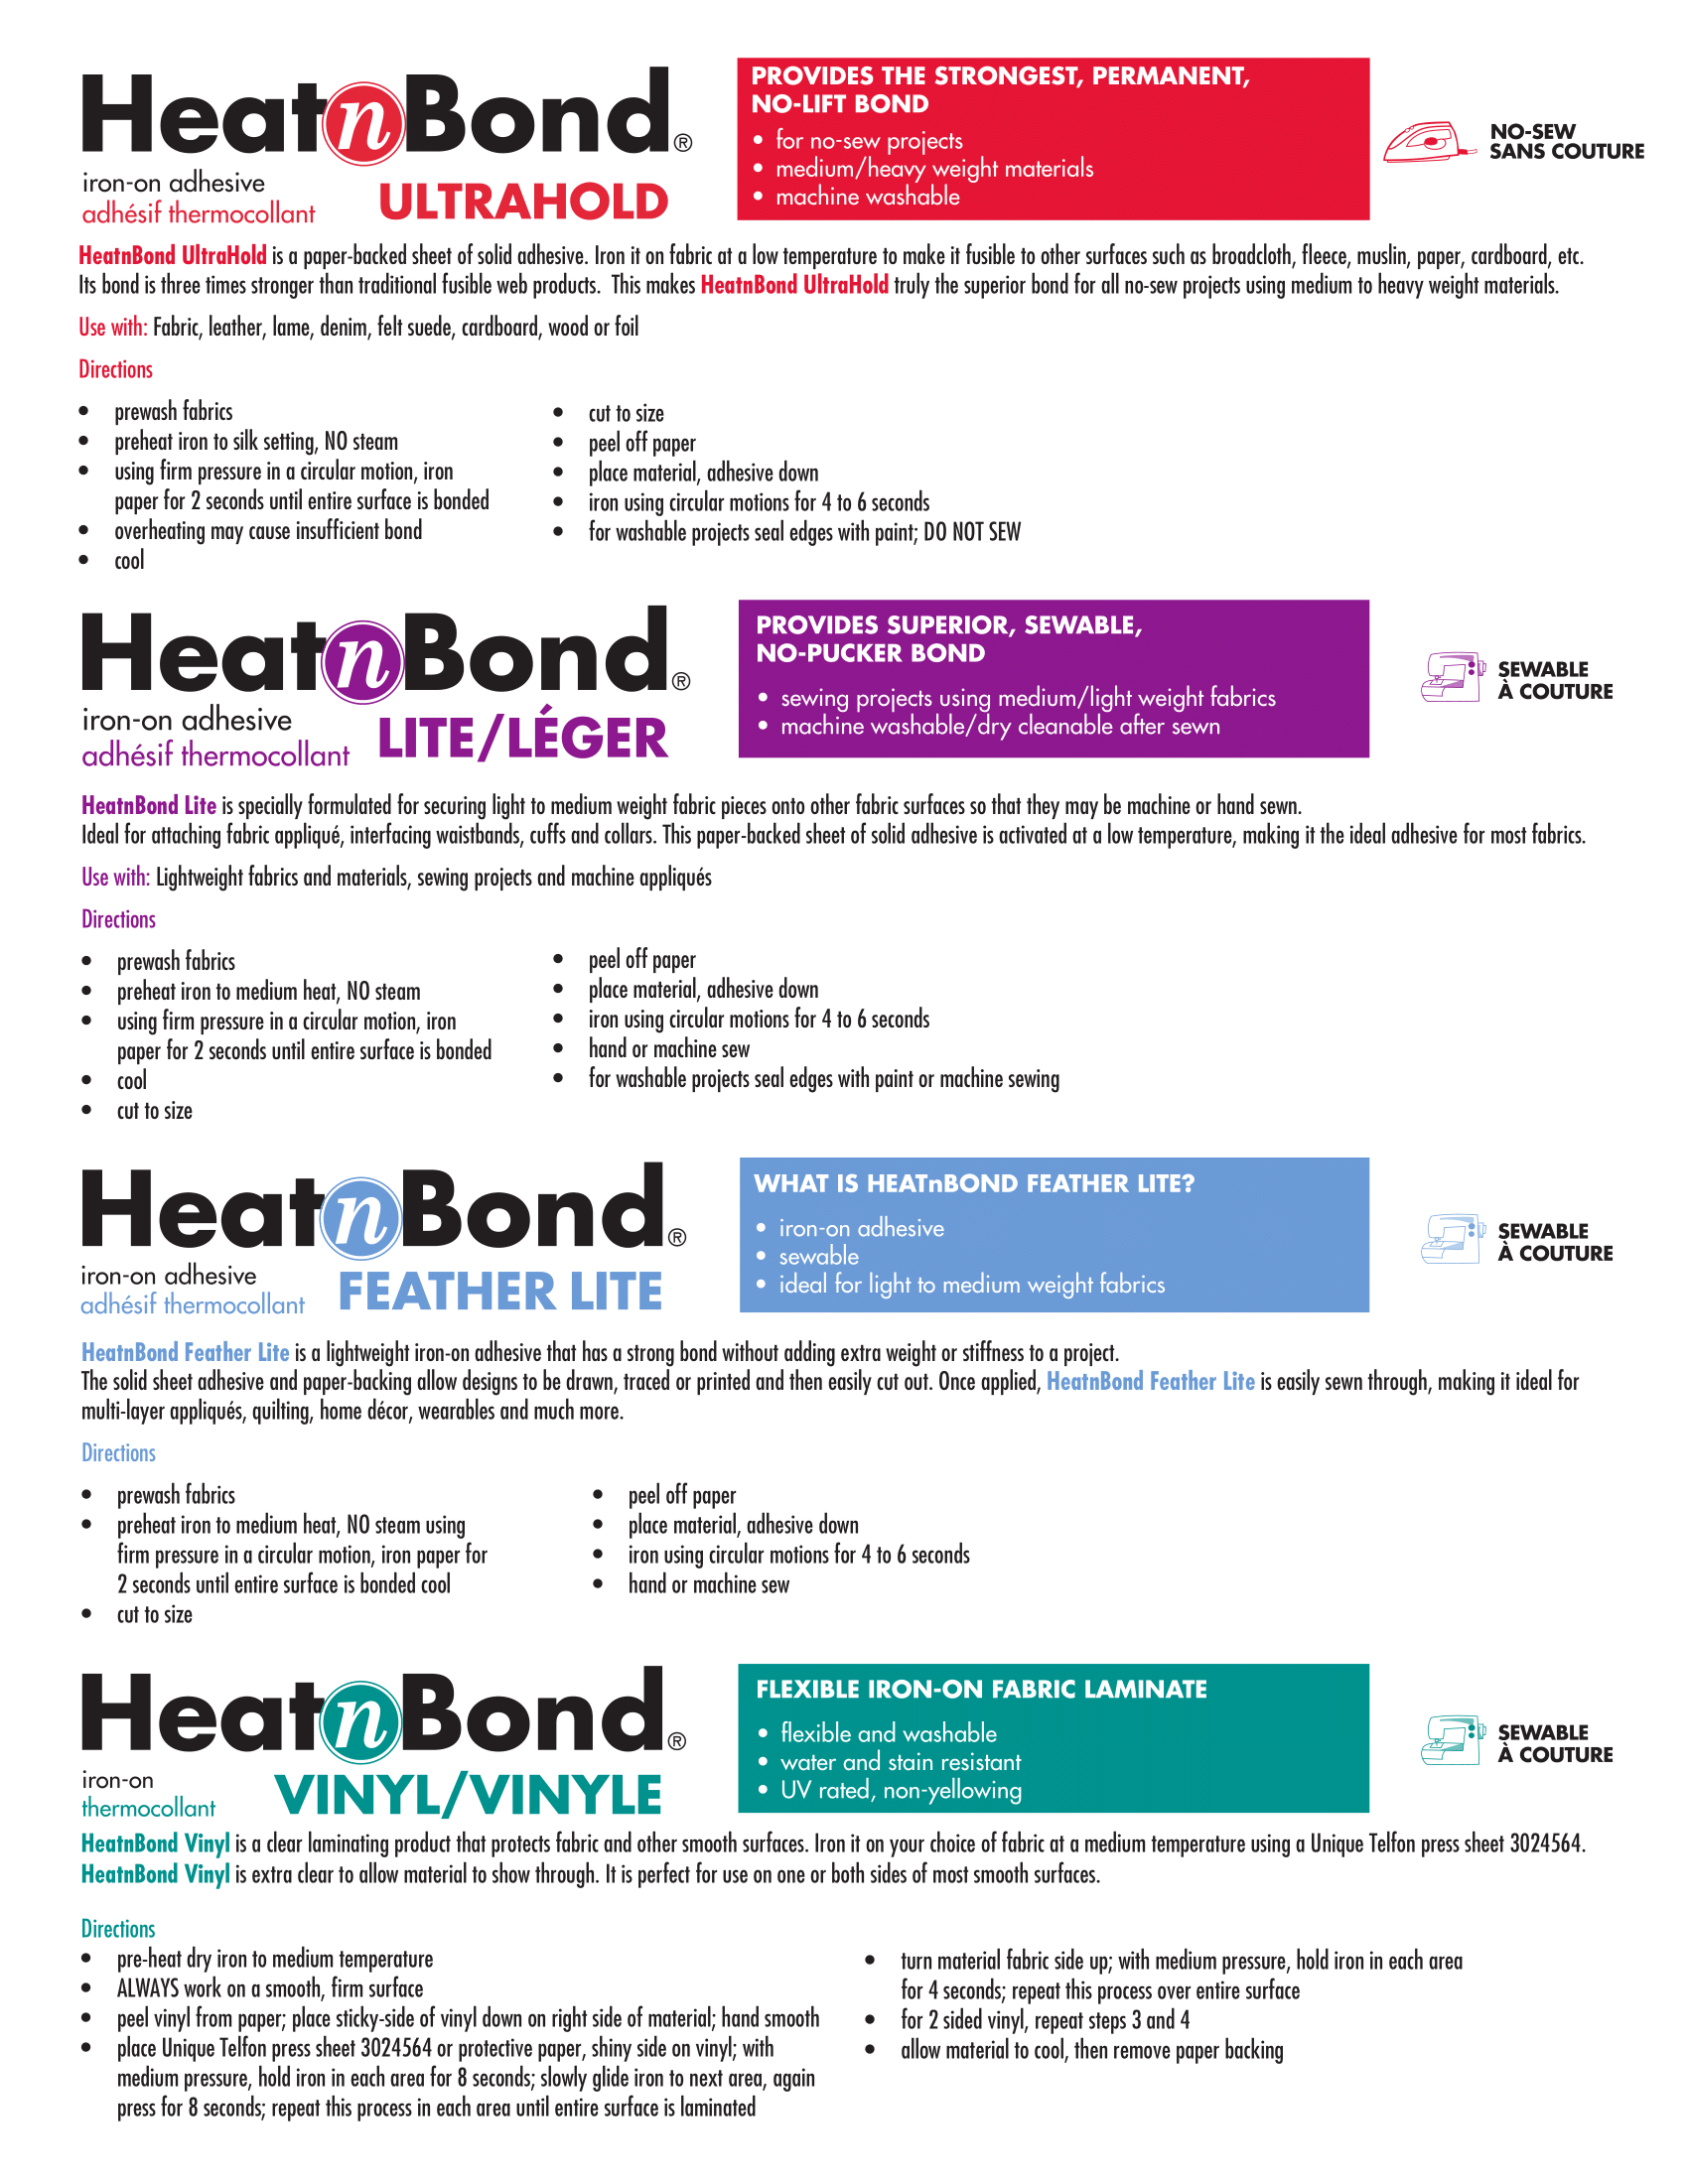 Detailed decription, uses & directions for HeatnBond products